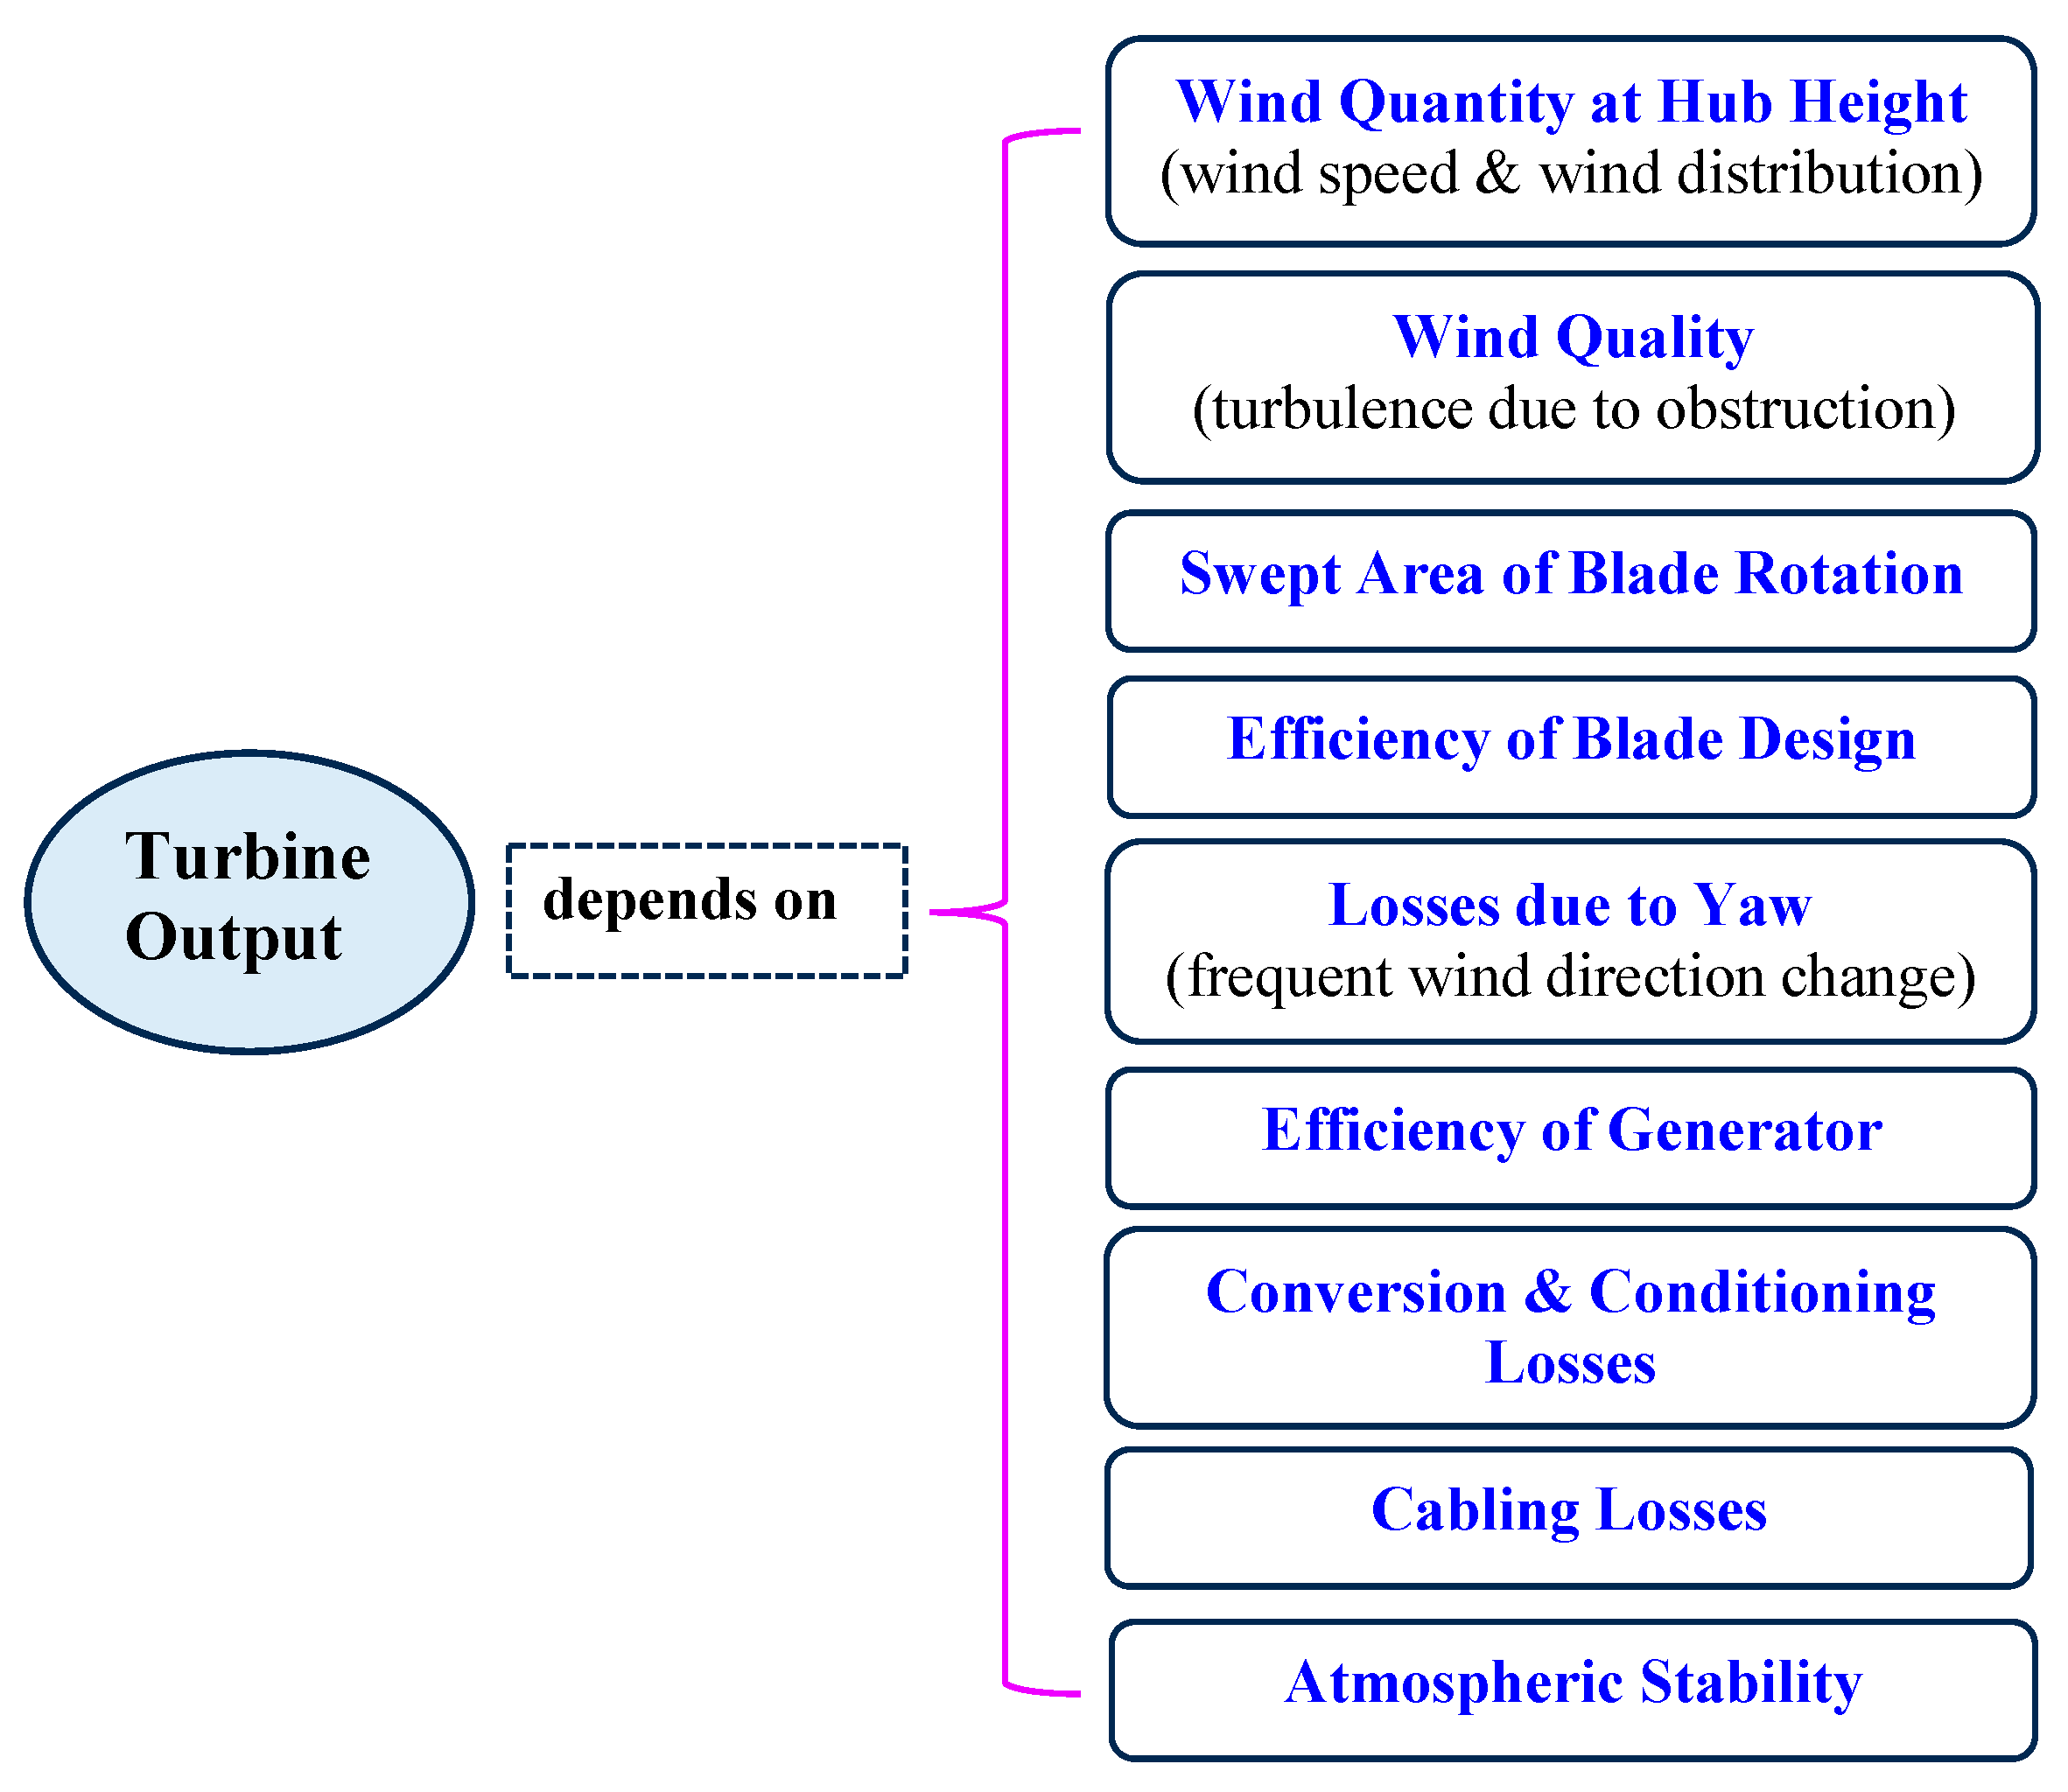 Electric power output as function of wind velocity (wind direction